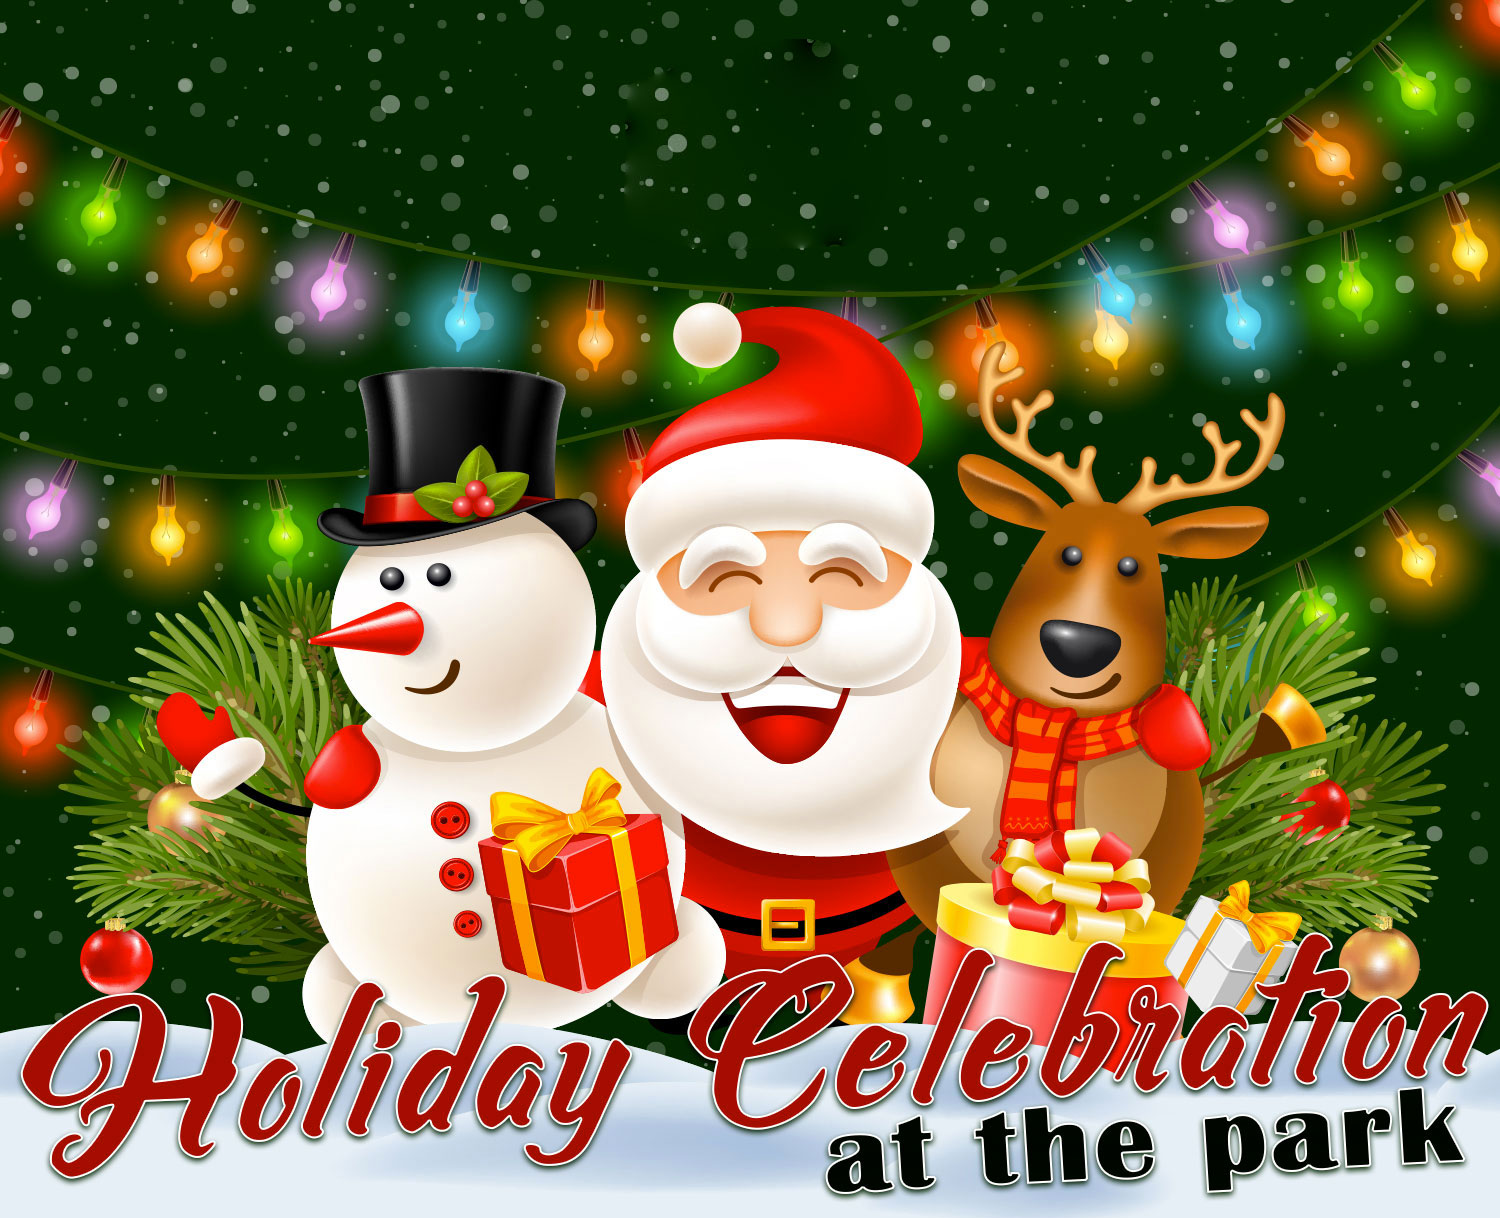 City of Doral - Holiday Celebration At The Park